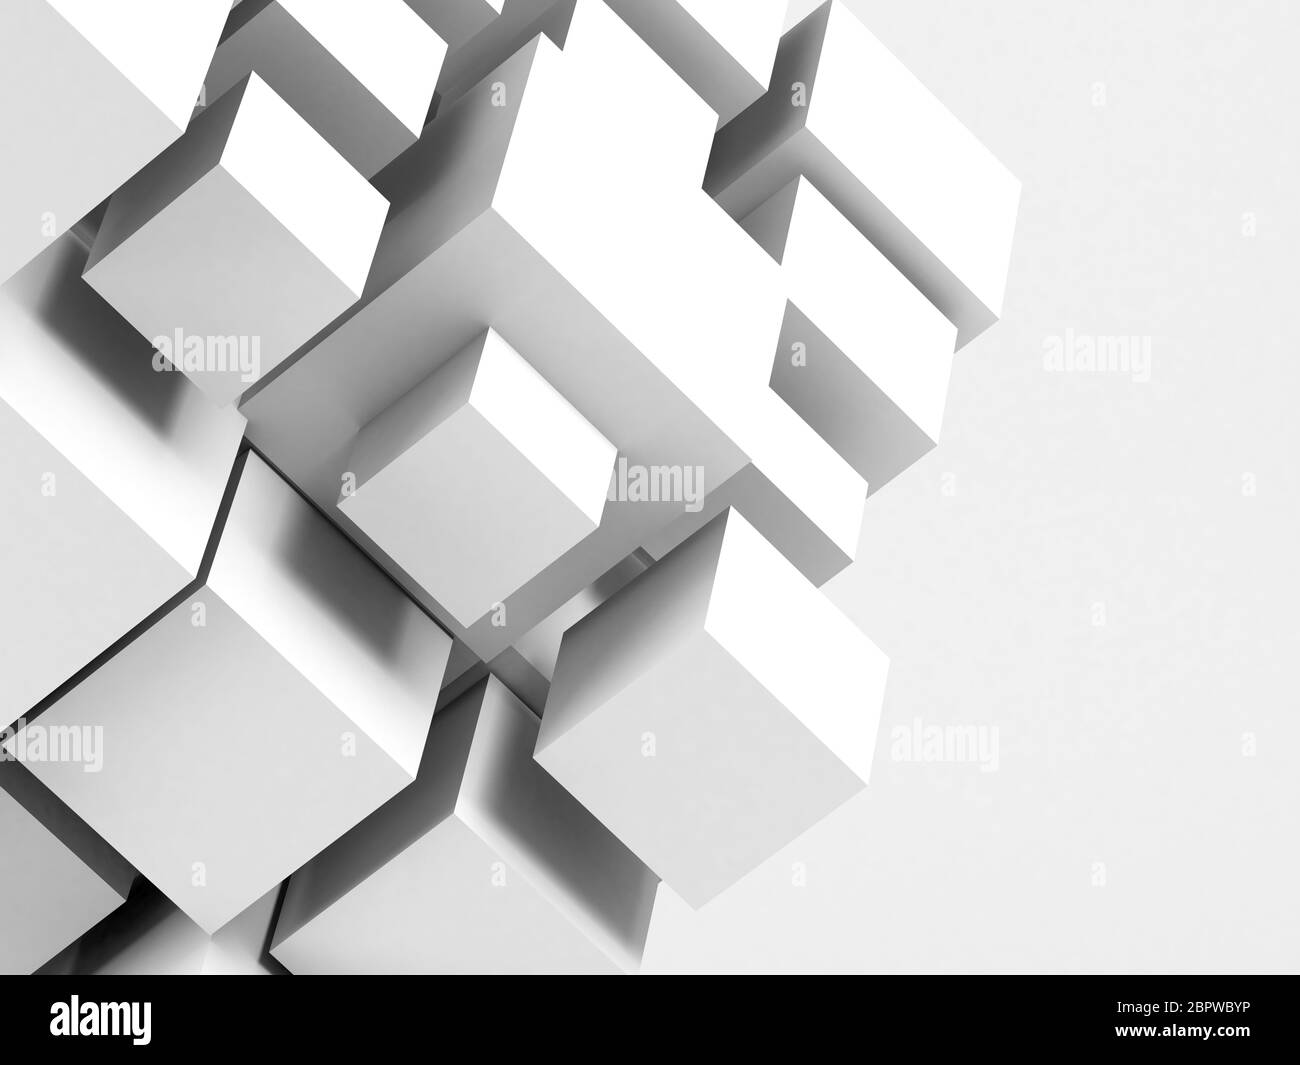 Abstract white installation of random sized cubes over light gray background. Digital cloudy data storage concept. 3d rendering illustration Stock Photo